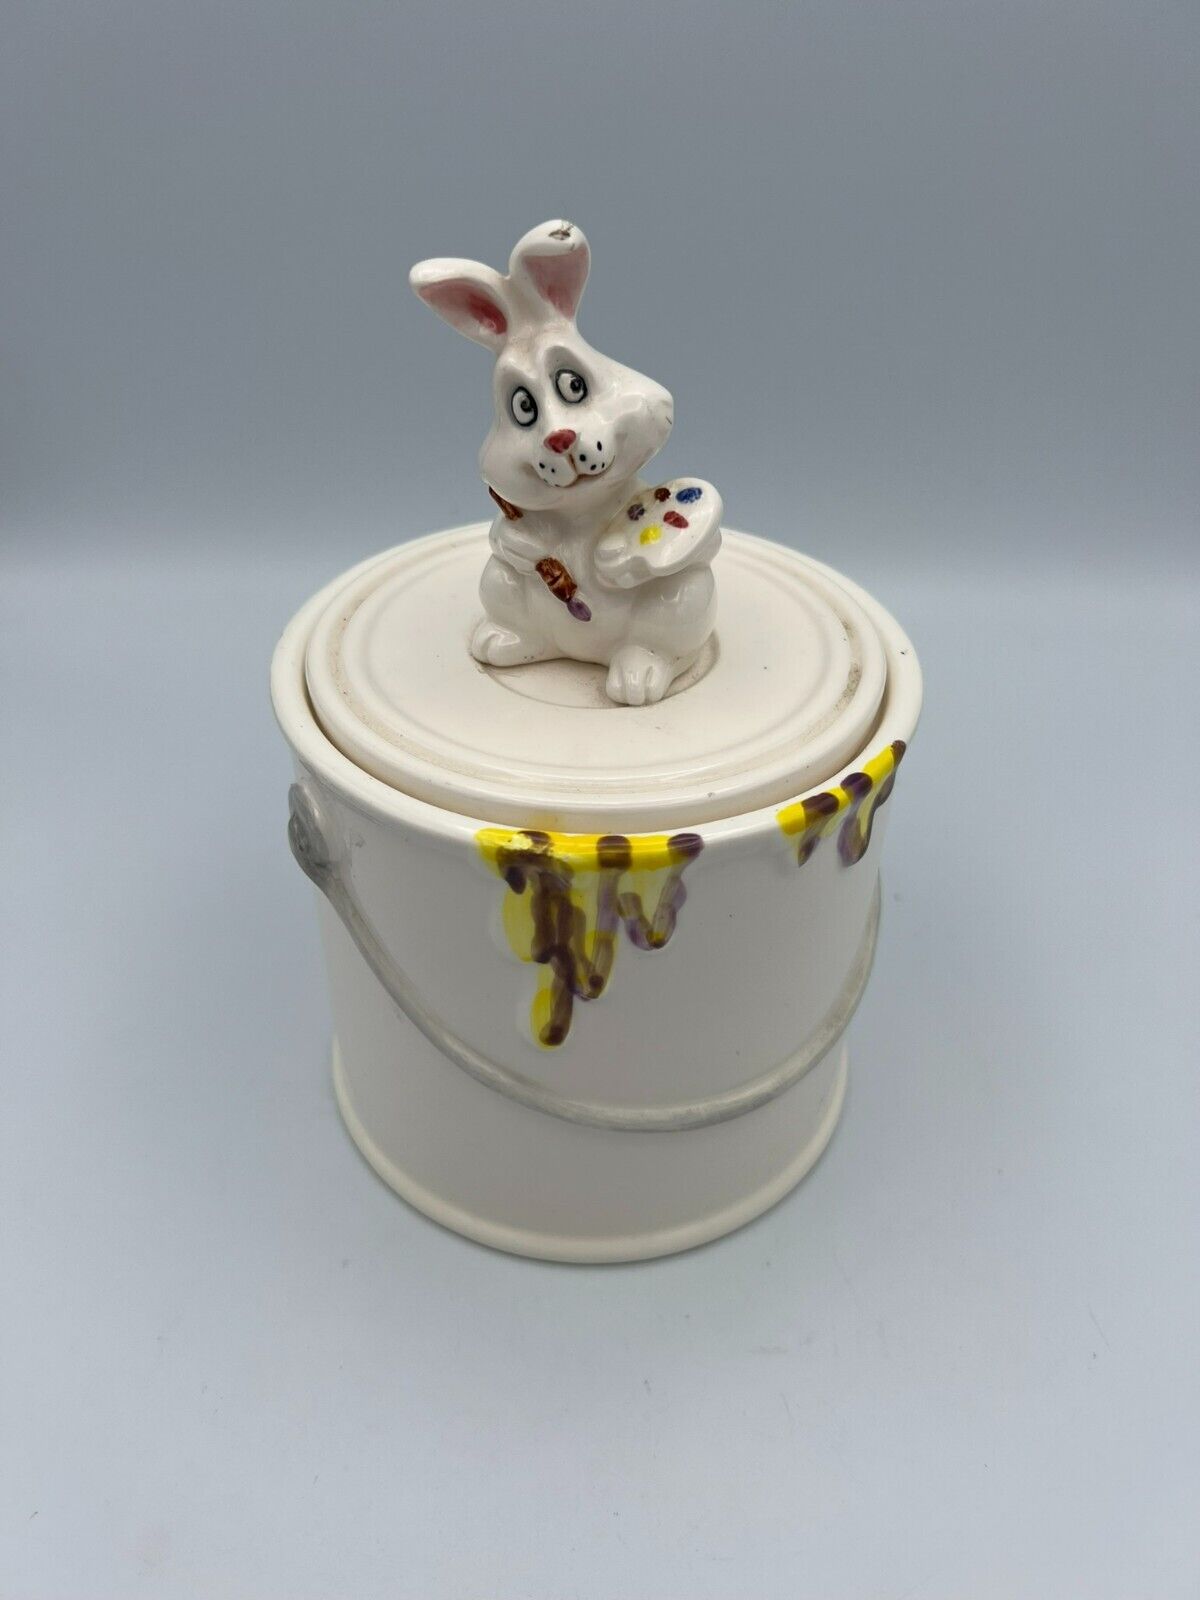 Vintage Quon Quon 1981 Ceramic Canister Paint Can w/ Rabbit